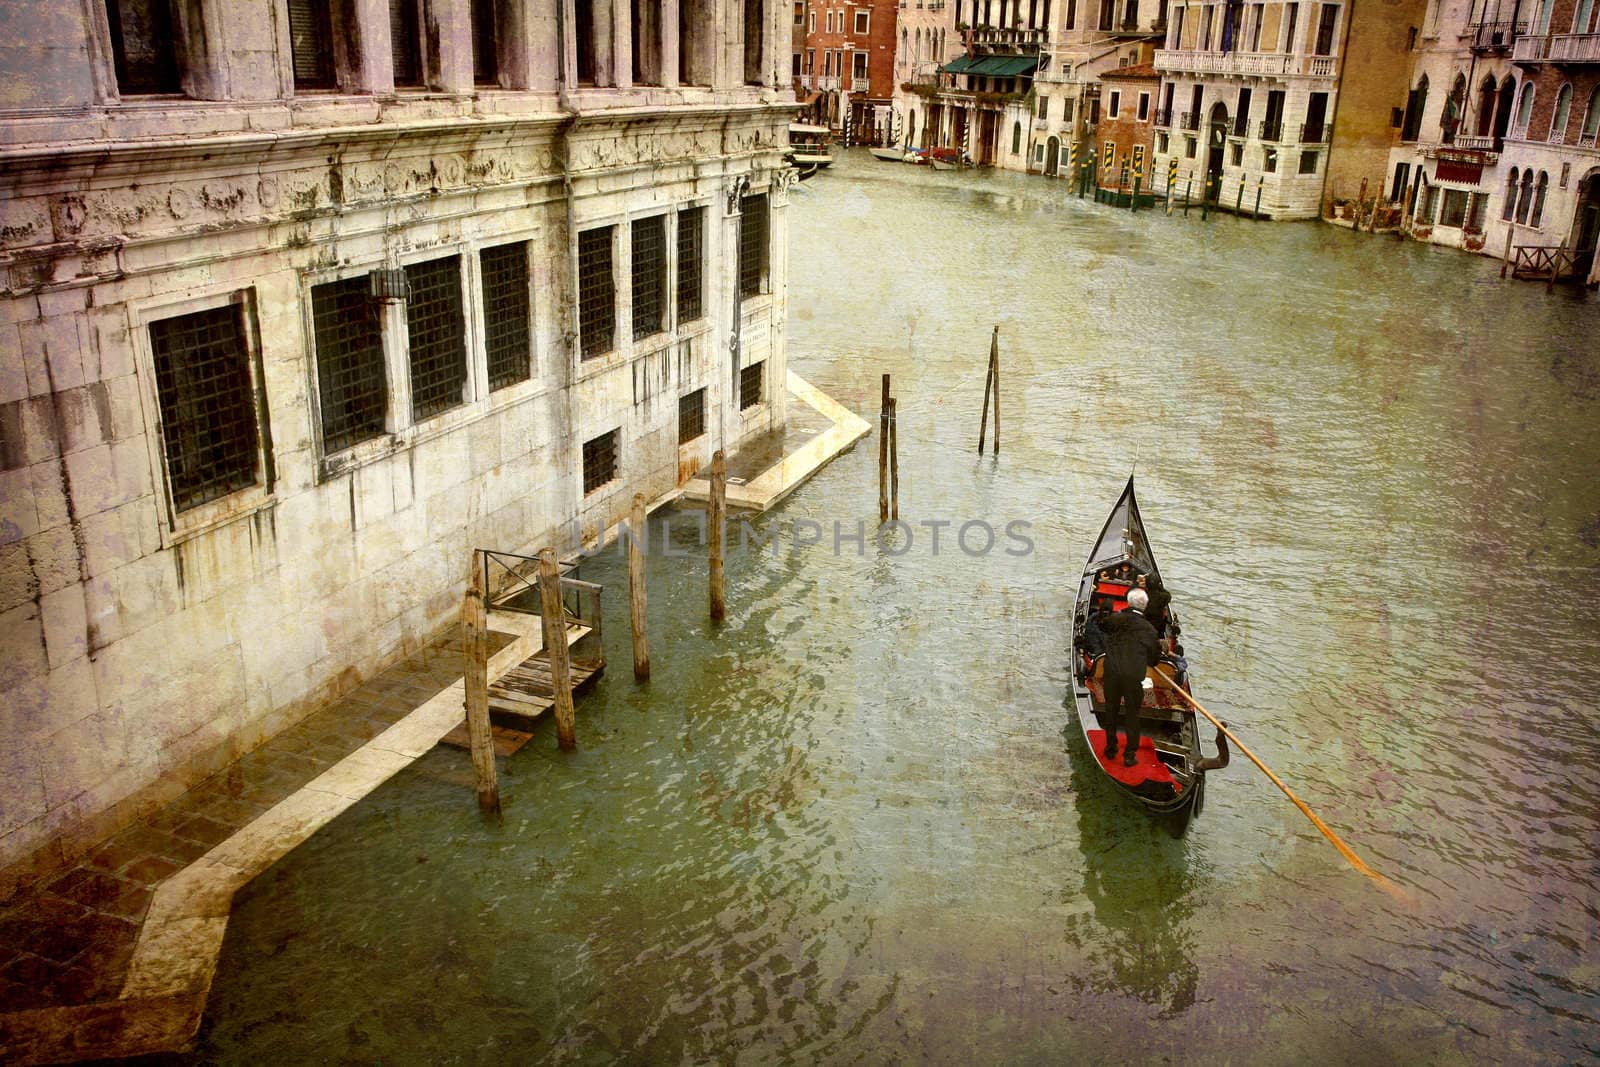 Artistic work of my own in retro style - Postcard from Italy. - Gondola Grand Canal - Venice.